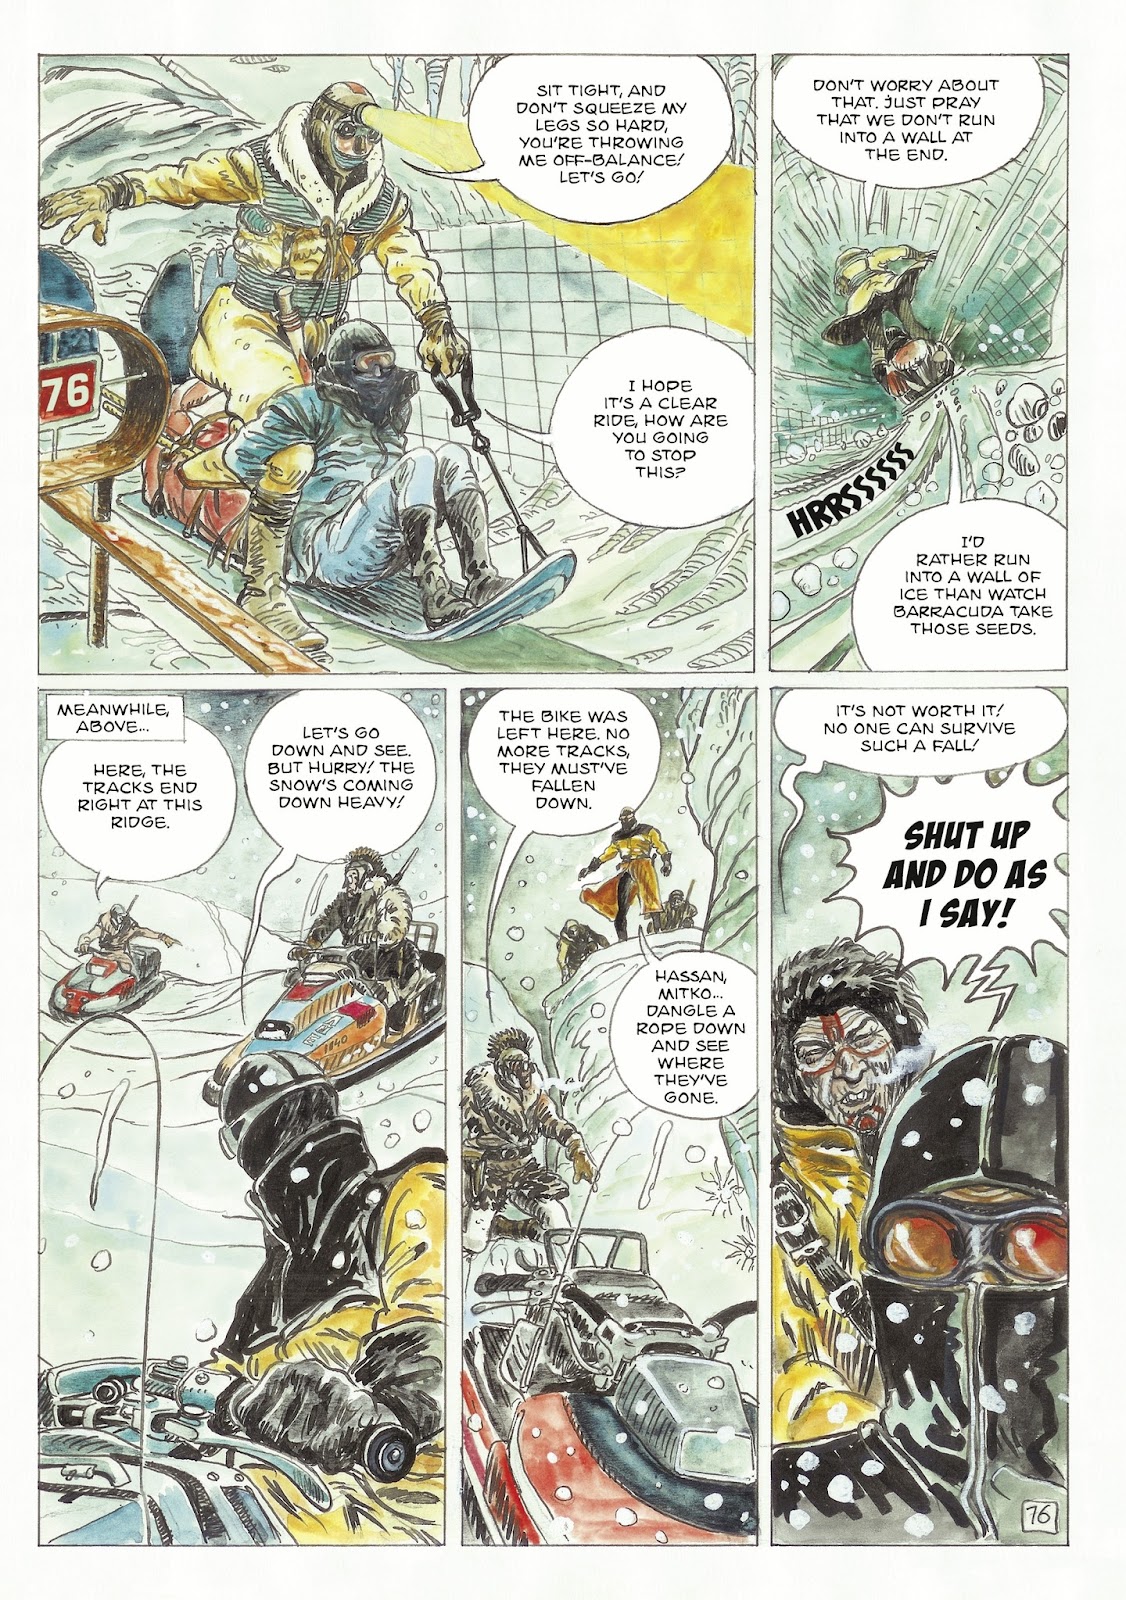 The Man With the Bear issue 2 - Page 22